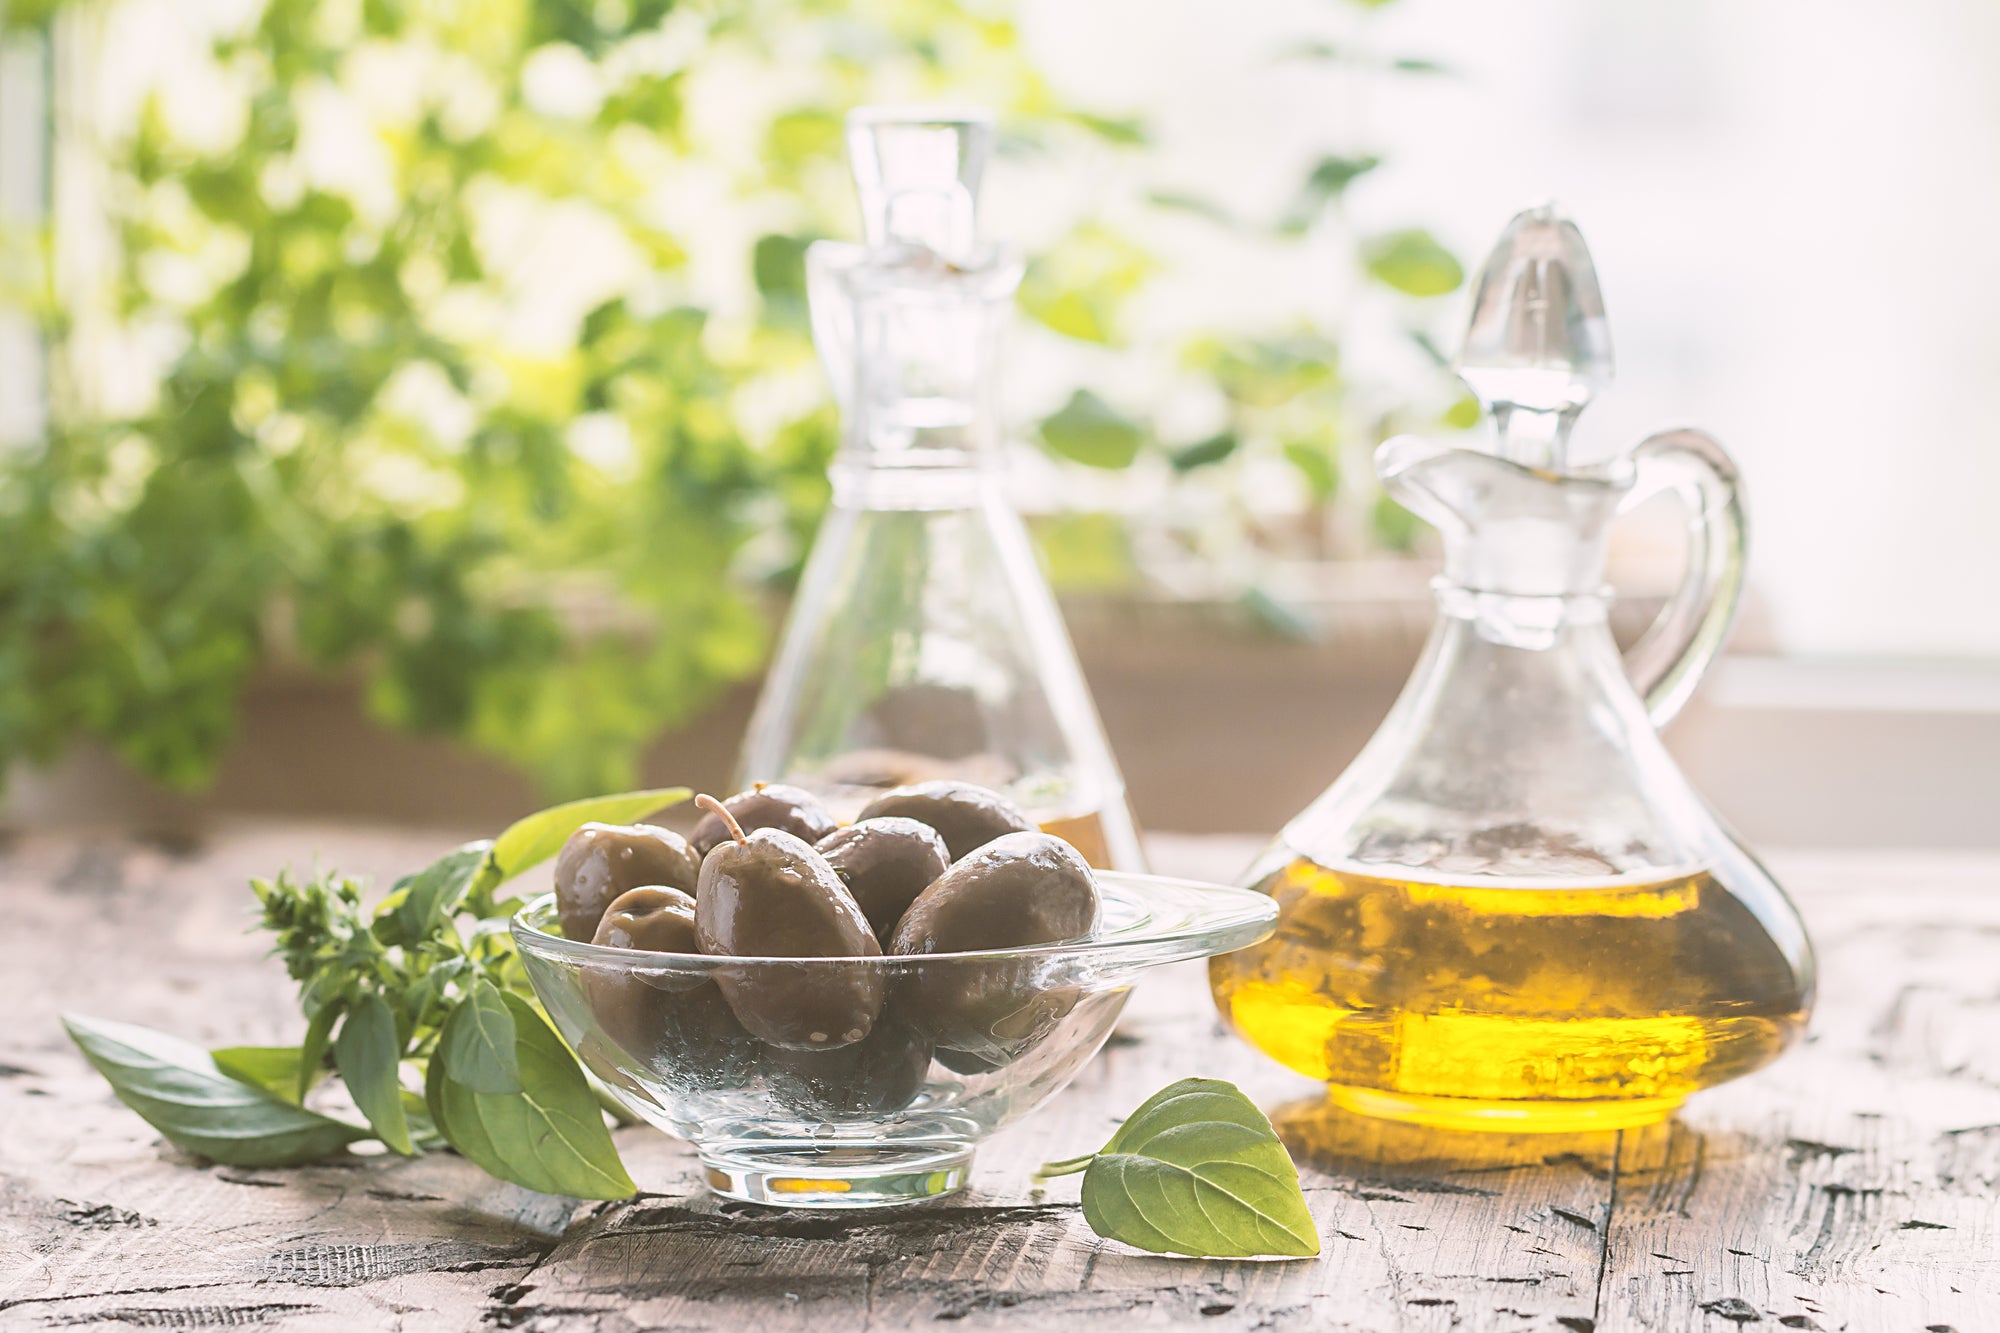 4 Interesting Ways Olive Oil Can Help Build Muscle - Opus Live Well